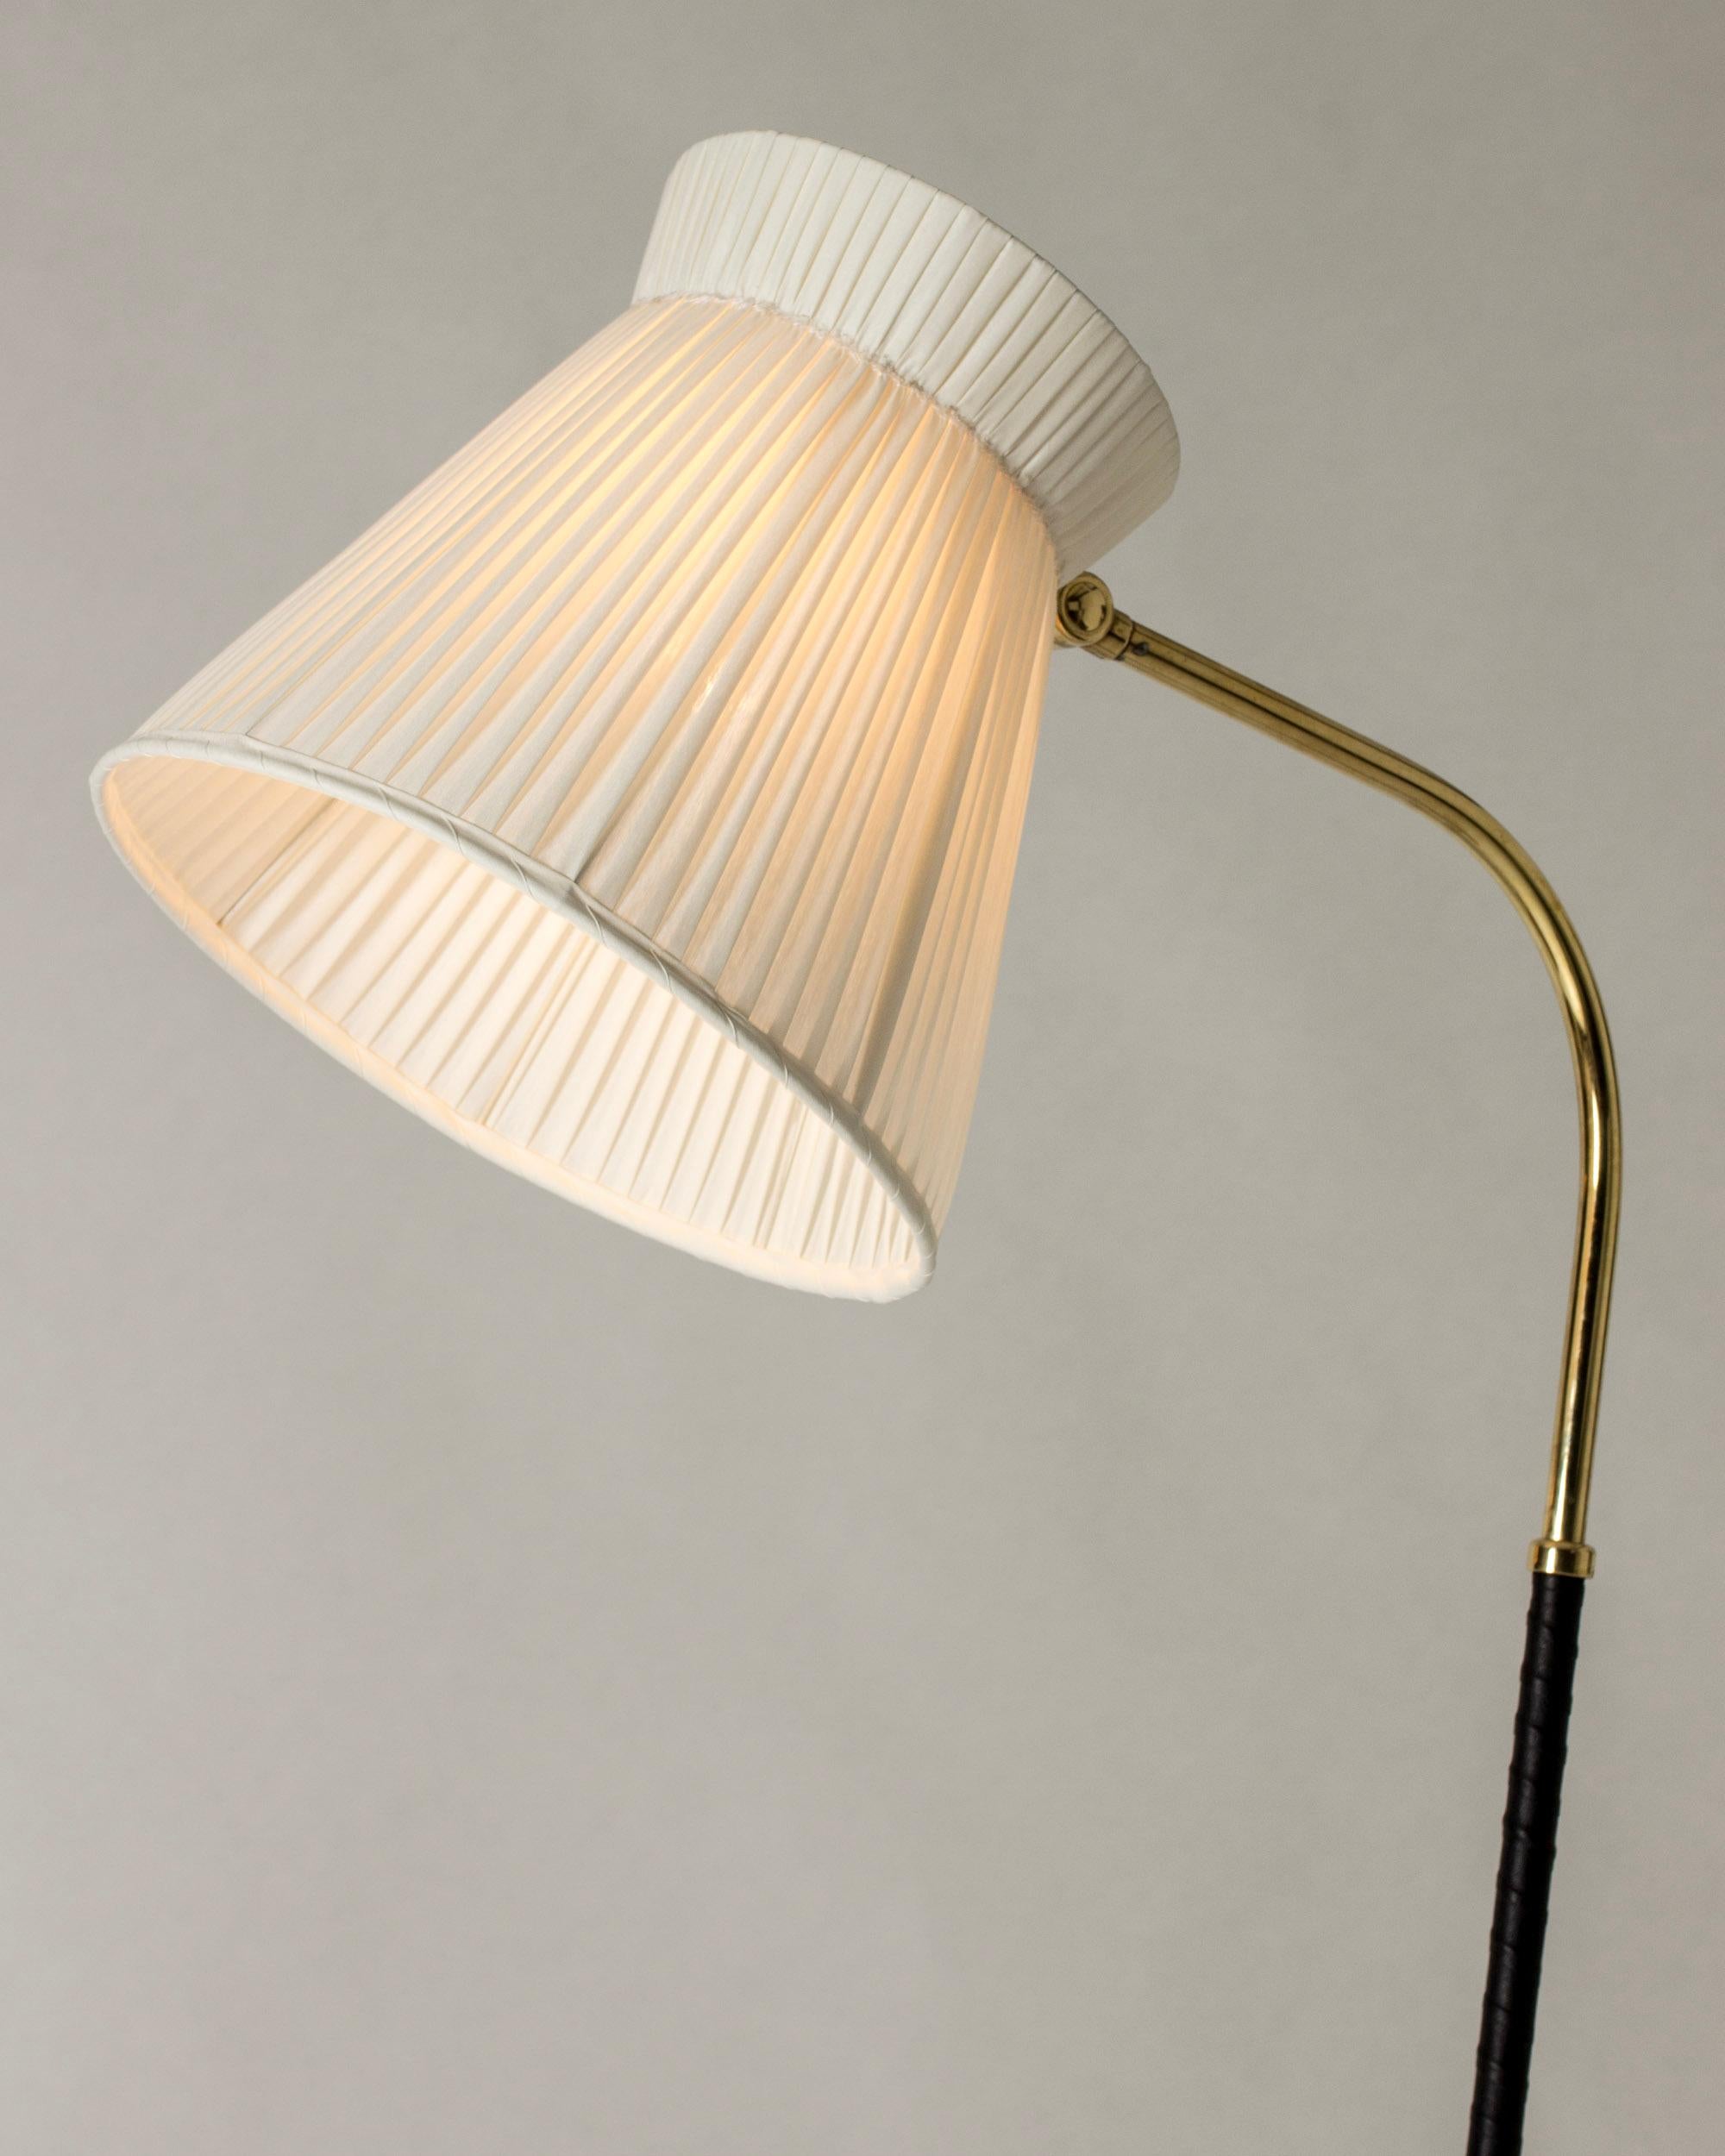 Midcentury Modern Floor Lamp by Lisa Johansson-Pape for Orno, Finland For Sale 2